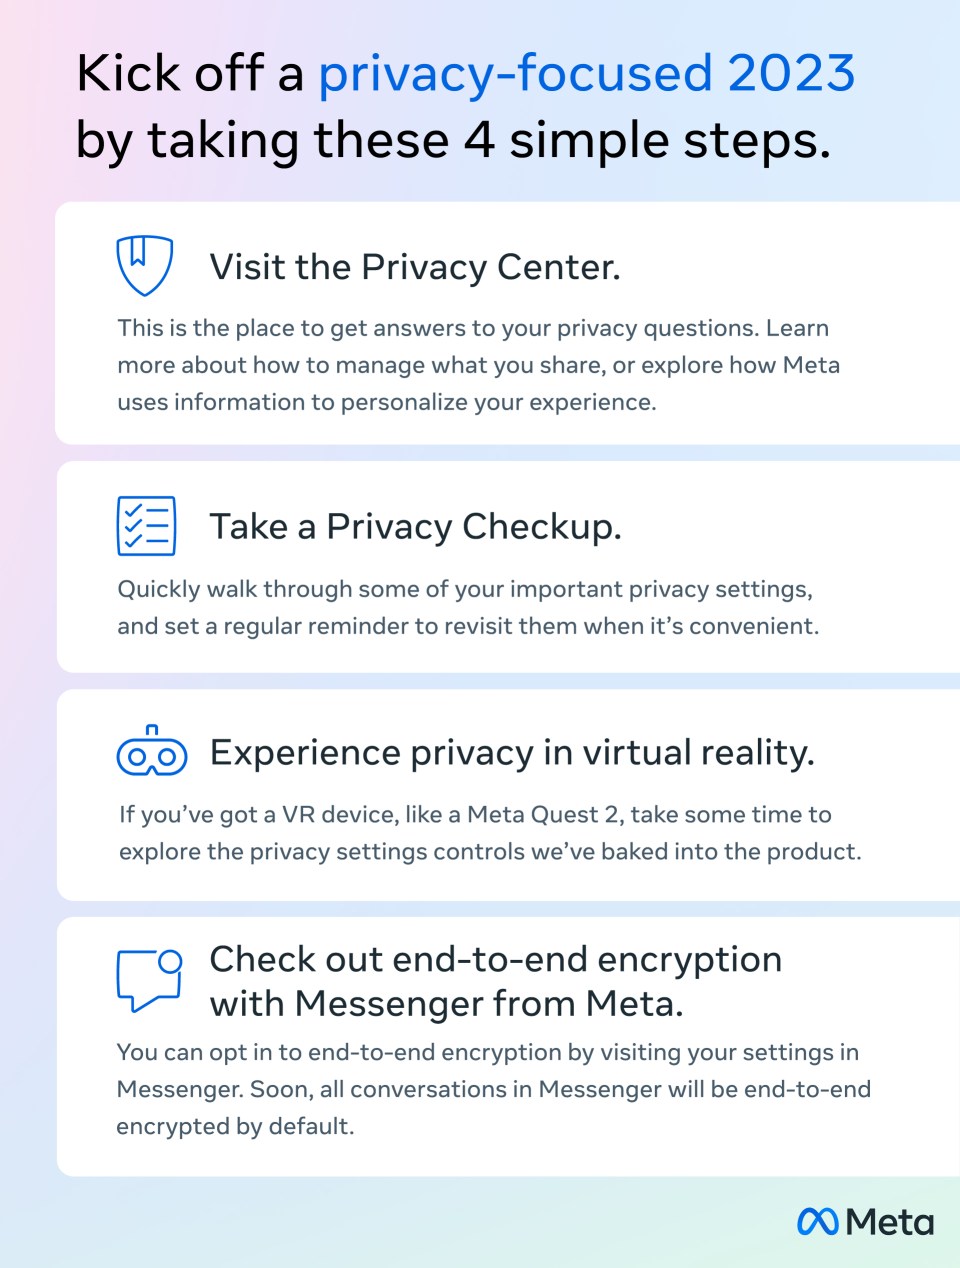 Infographic about tips to have a positive privacy experience